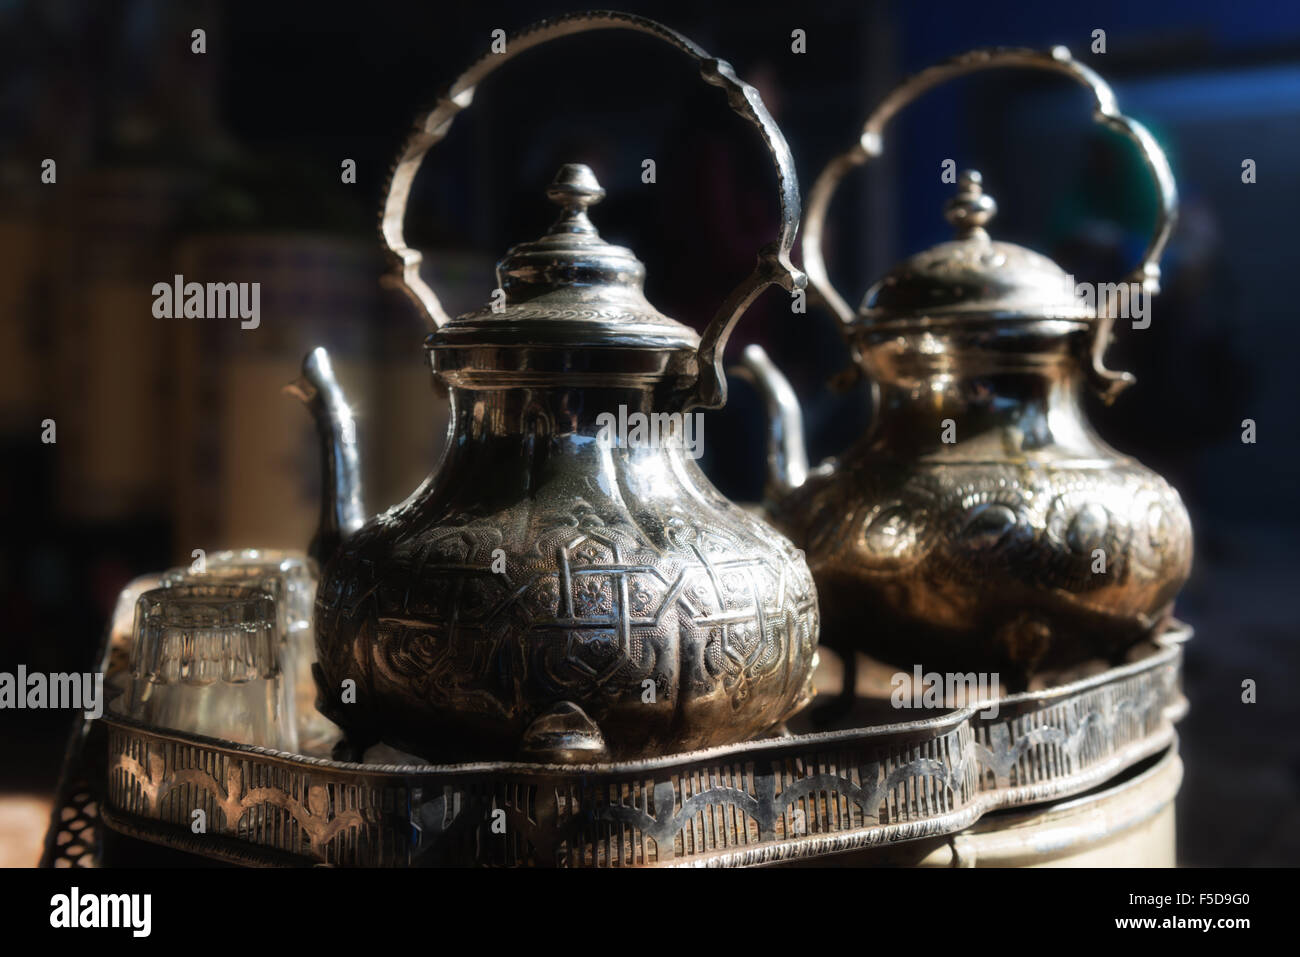 Traditional Moroccan teapot with glasses in a tea tray. Medina of Marrakesh, Morocco. Stock Photo